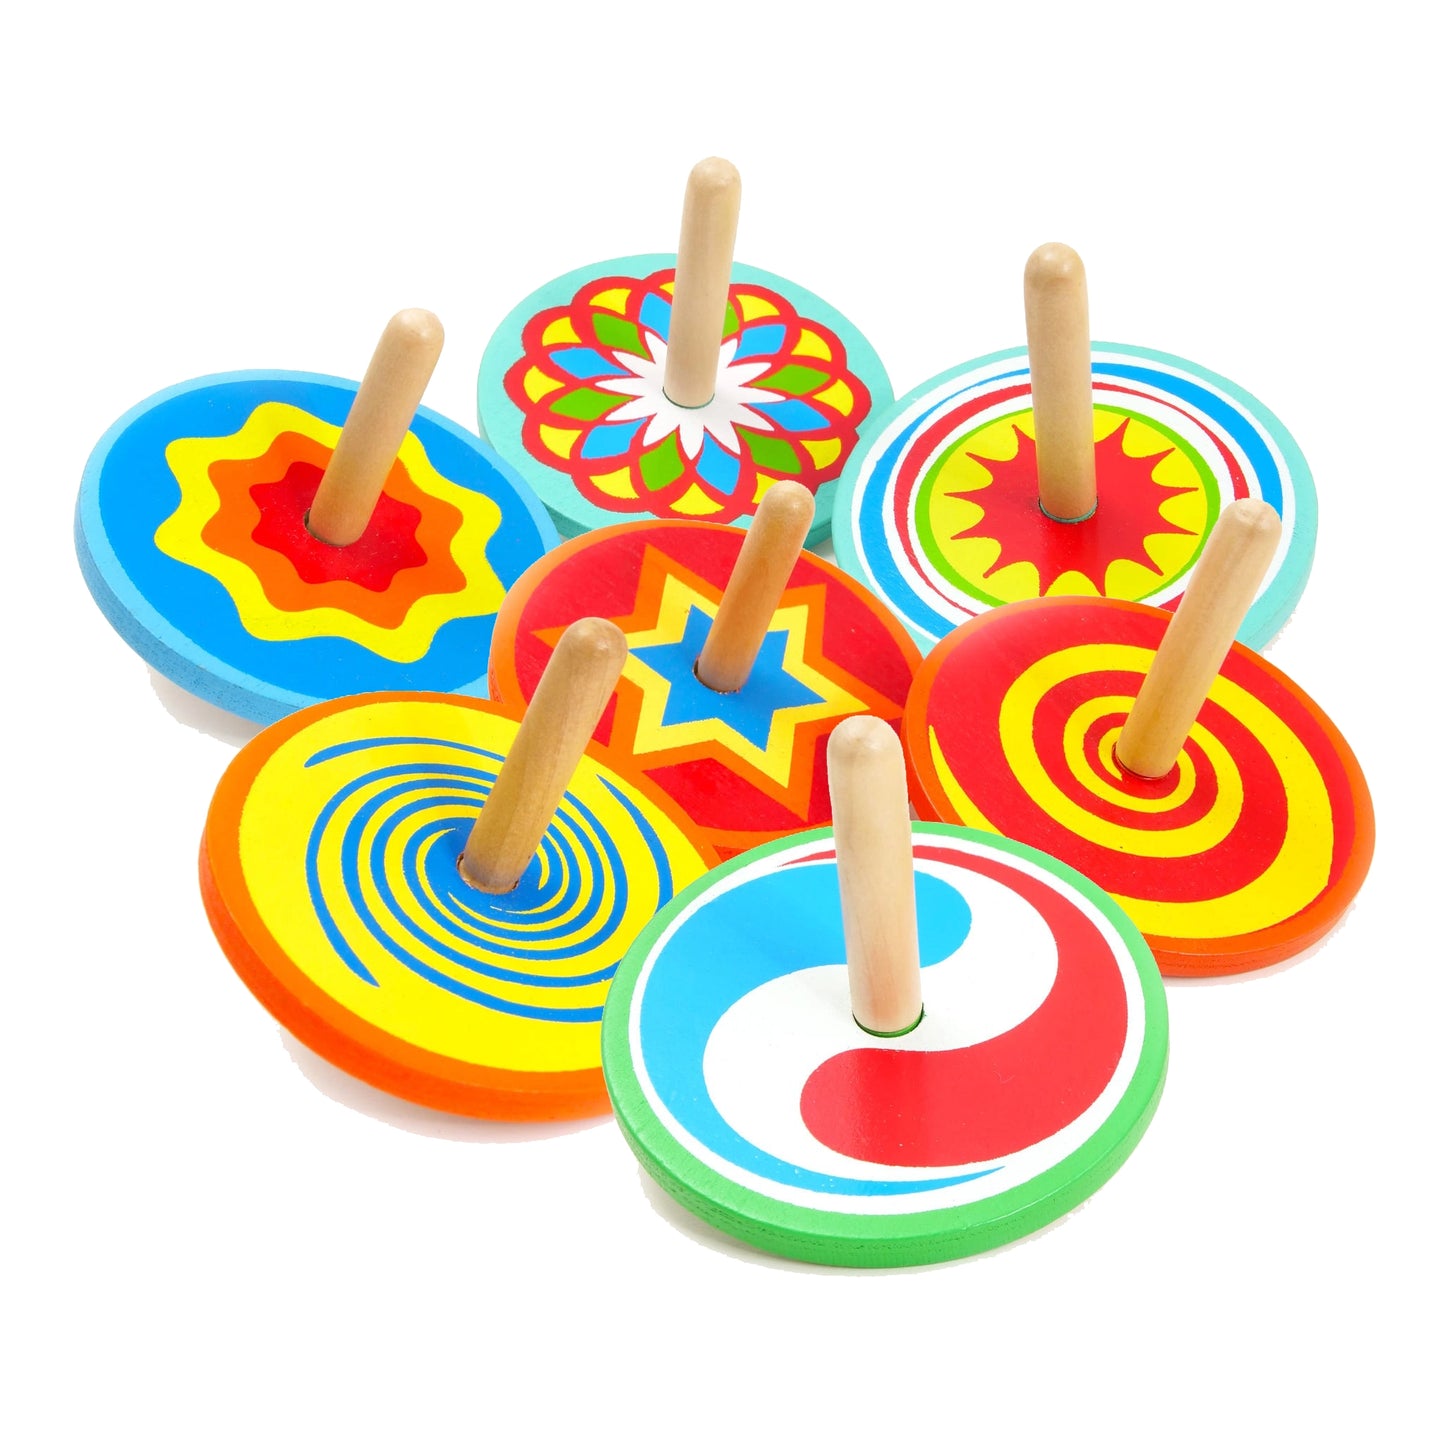 Wooden Spinning Top - House of Marbles - The Forgotten Toy Shop